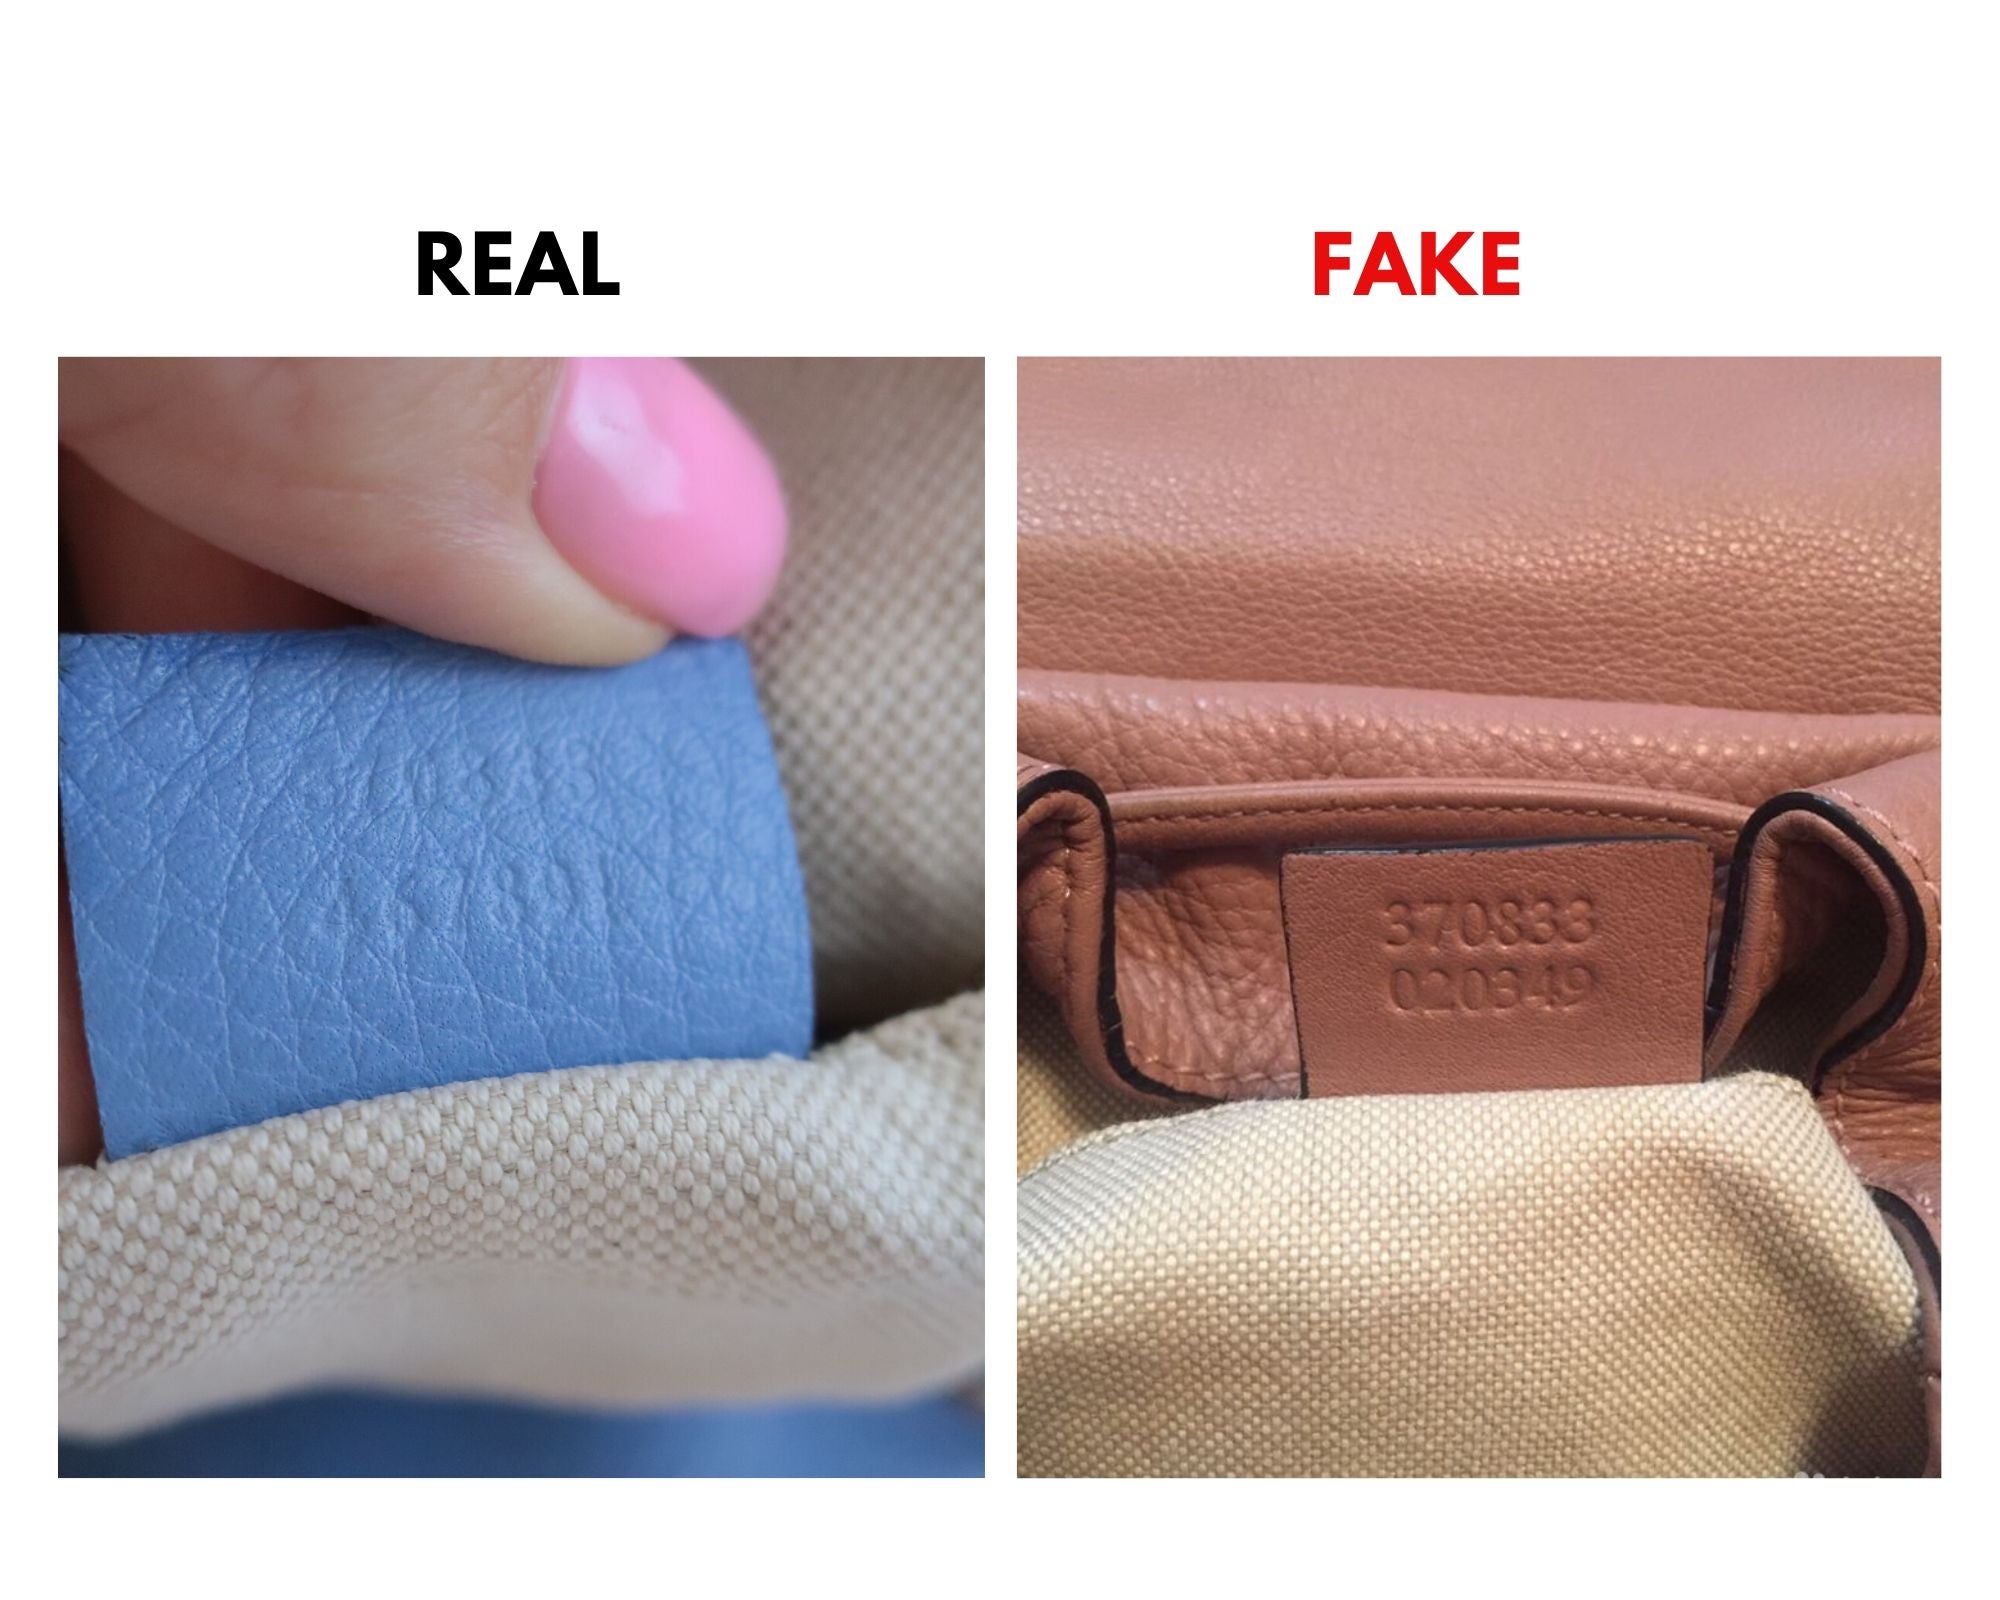 Gucci Bamboo Backpack: Real vs. Fake Comparison Serial Number 